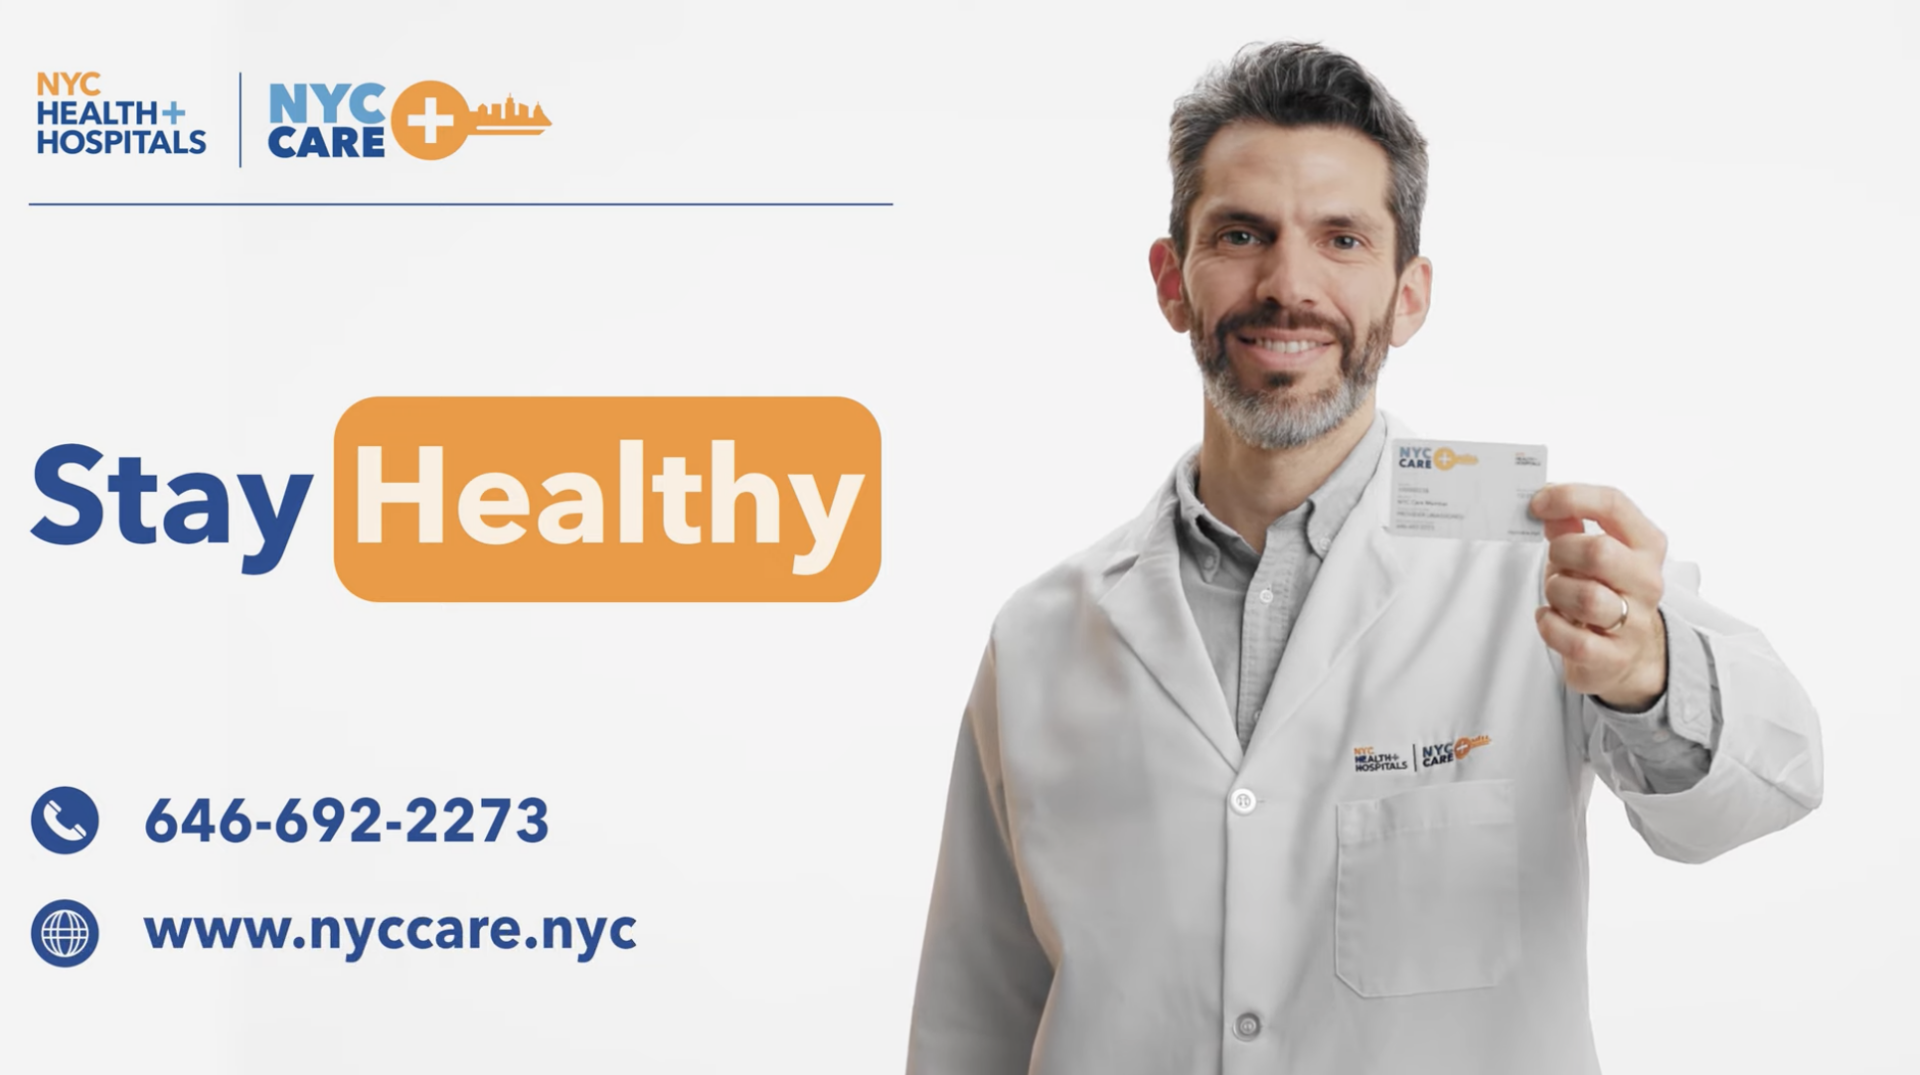 NYC Health + Hospitals, NYC Care PSAs by Show the Good